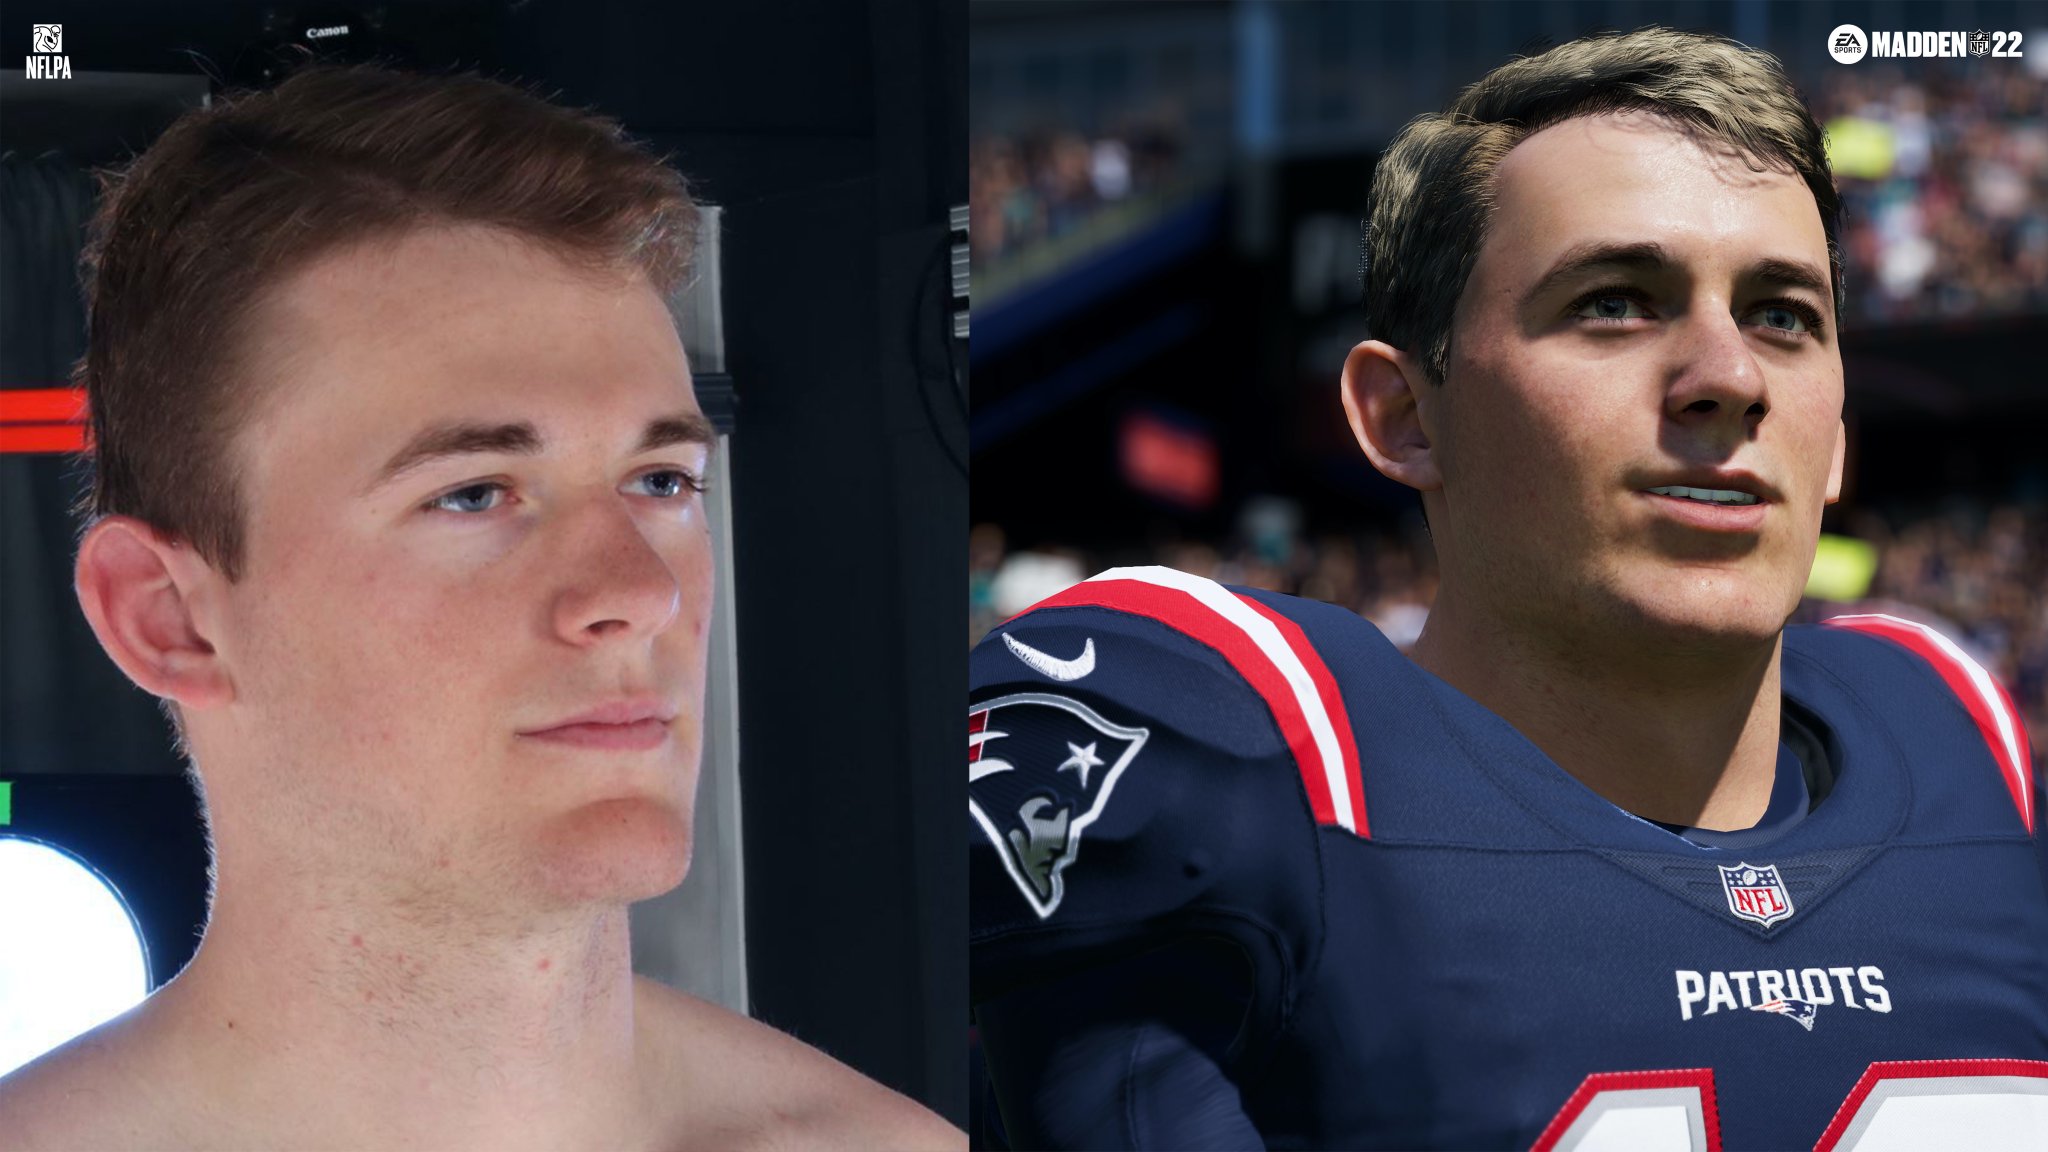 Madden 22 Mac Jones looks like your Uncle from Staten Island : r/The_Donta